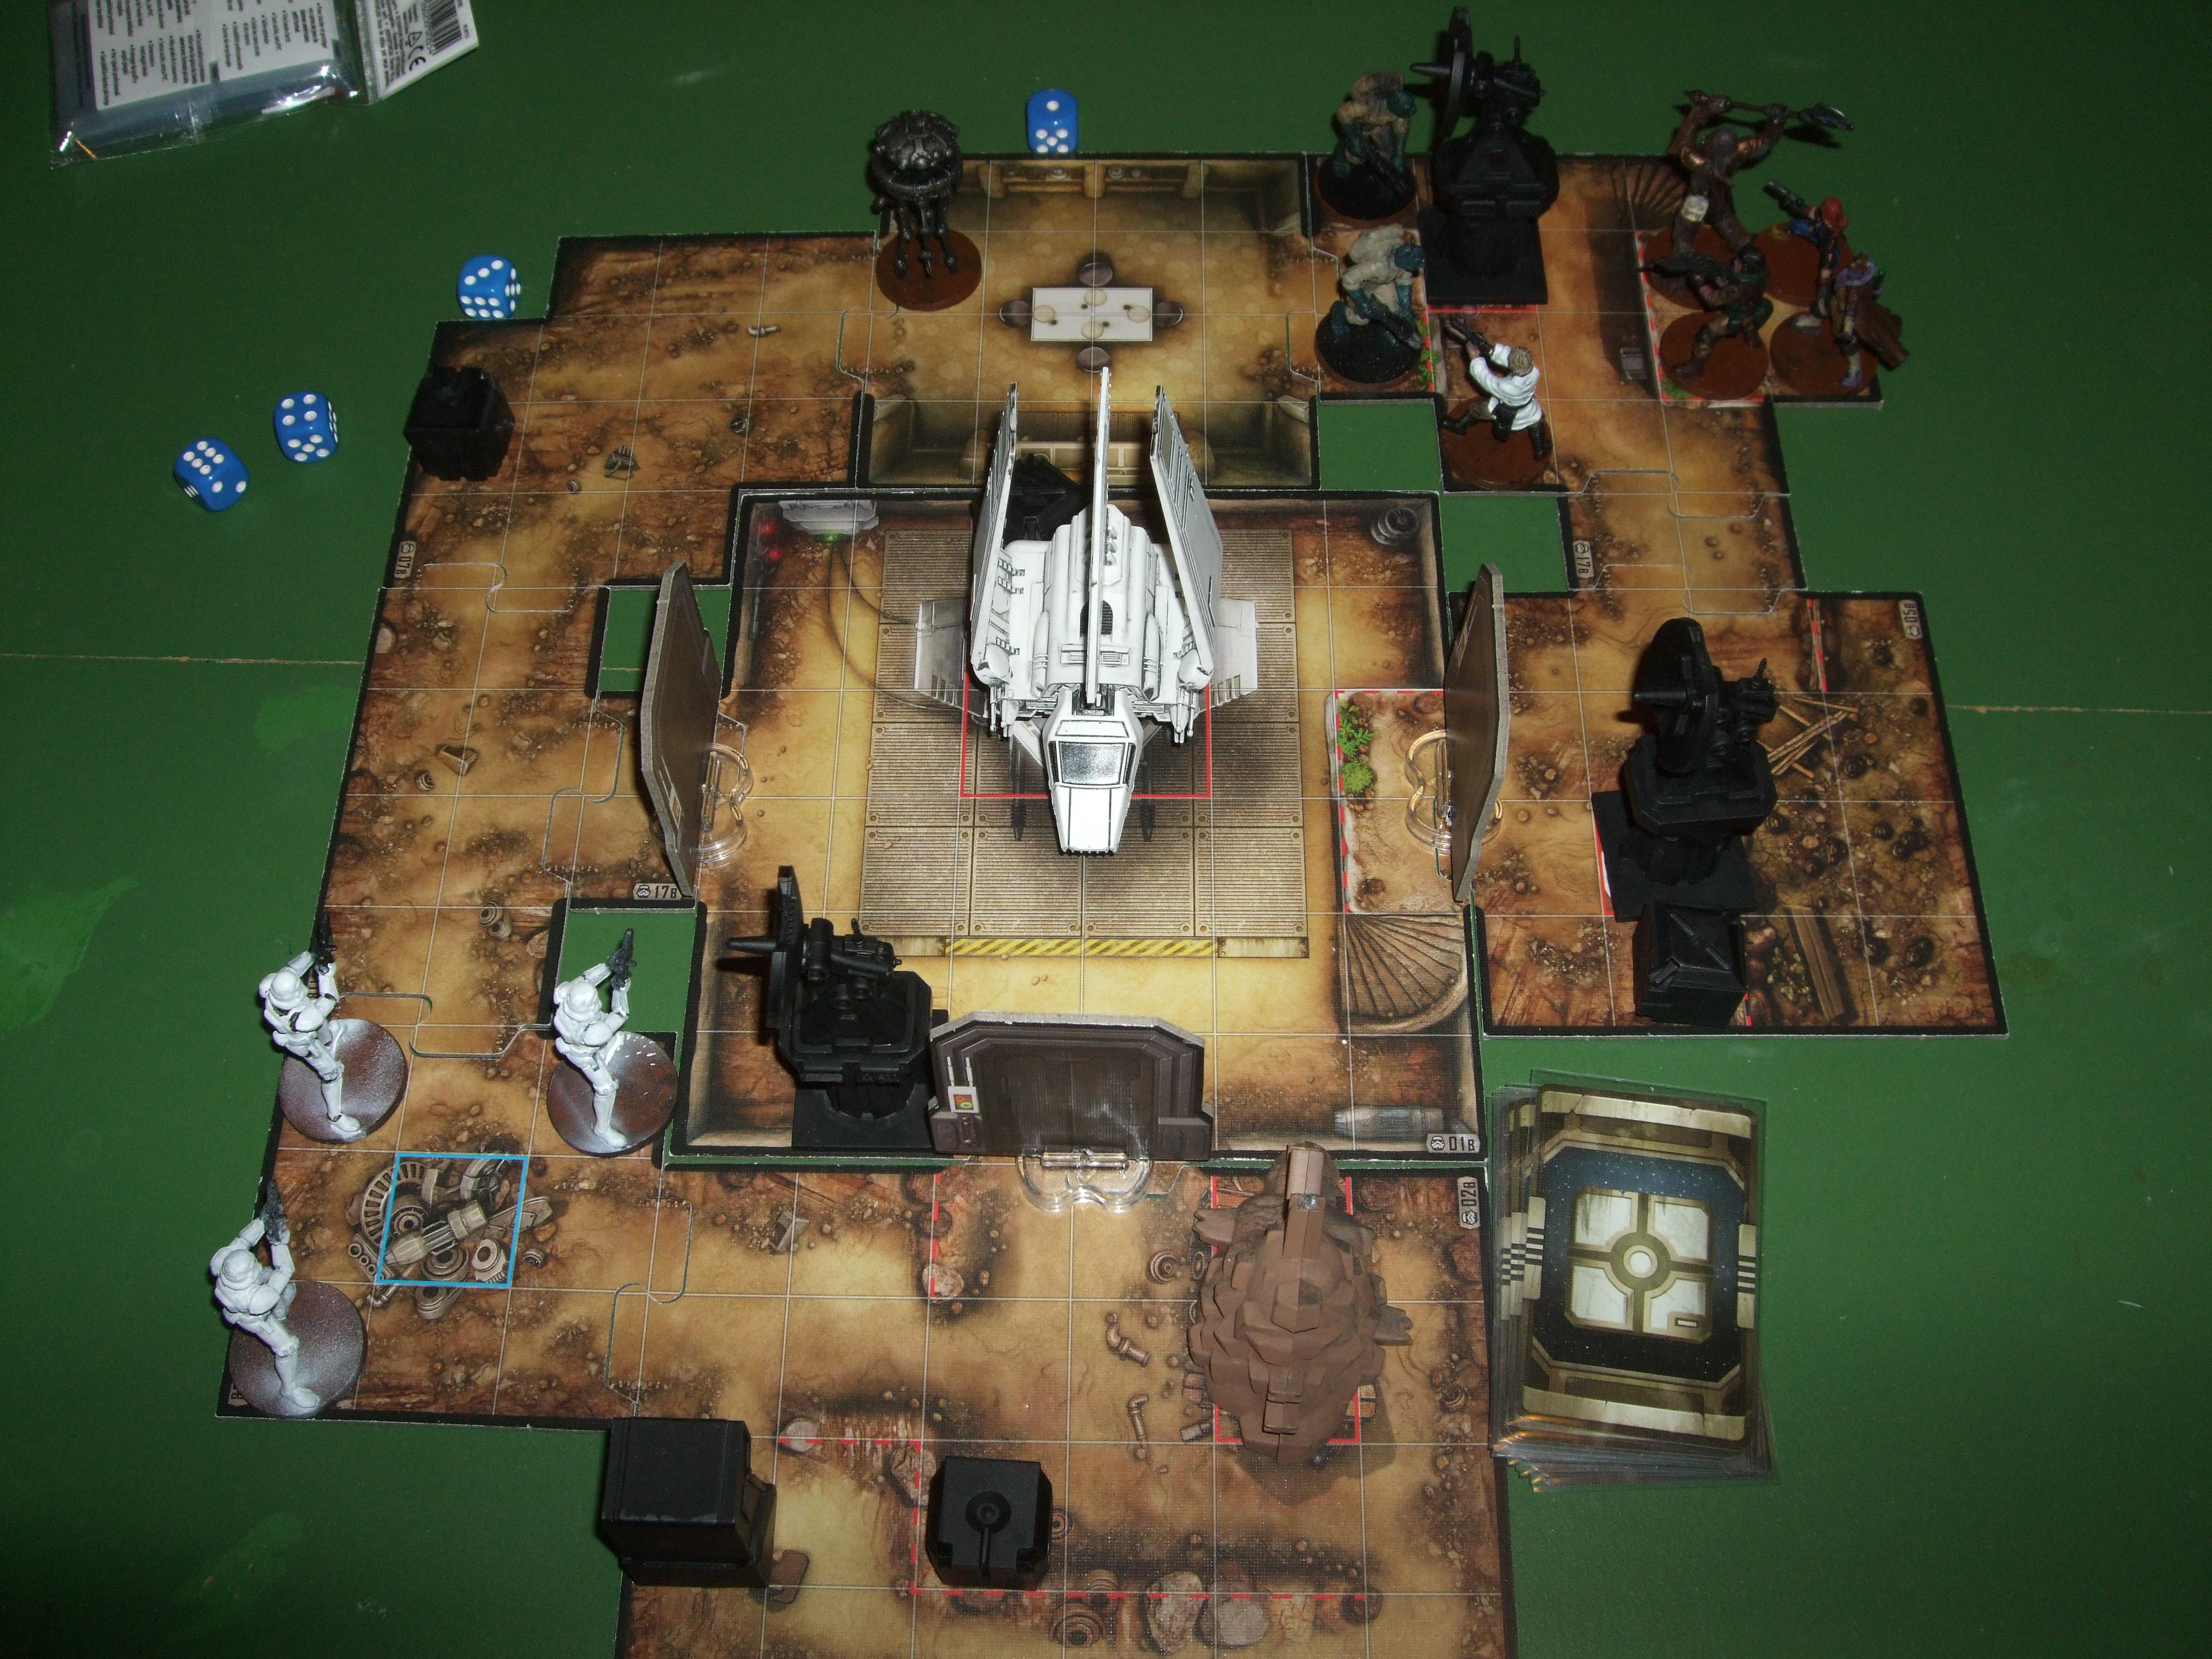 Homecoming, Imperial Assault, Star Wars